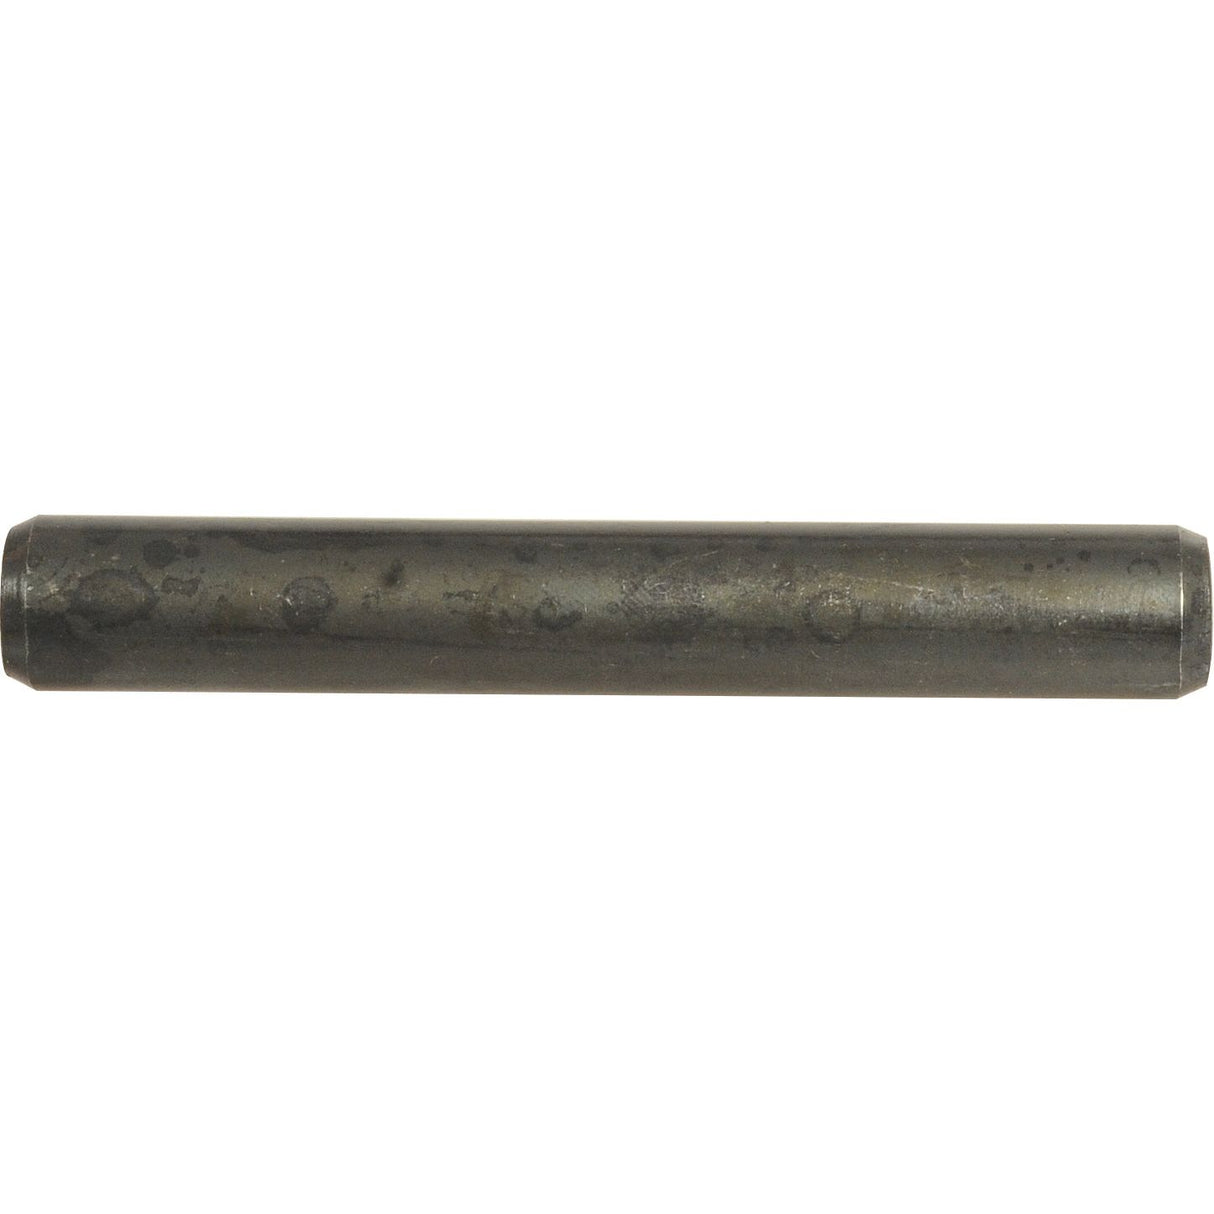 Imperial Roll Pin, Pin⌀5/16'' x 2 1/2''
 - S.1142 - Farming Parts